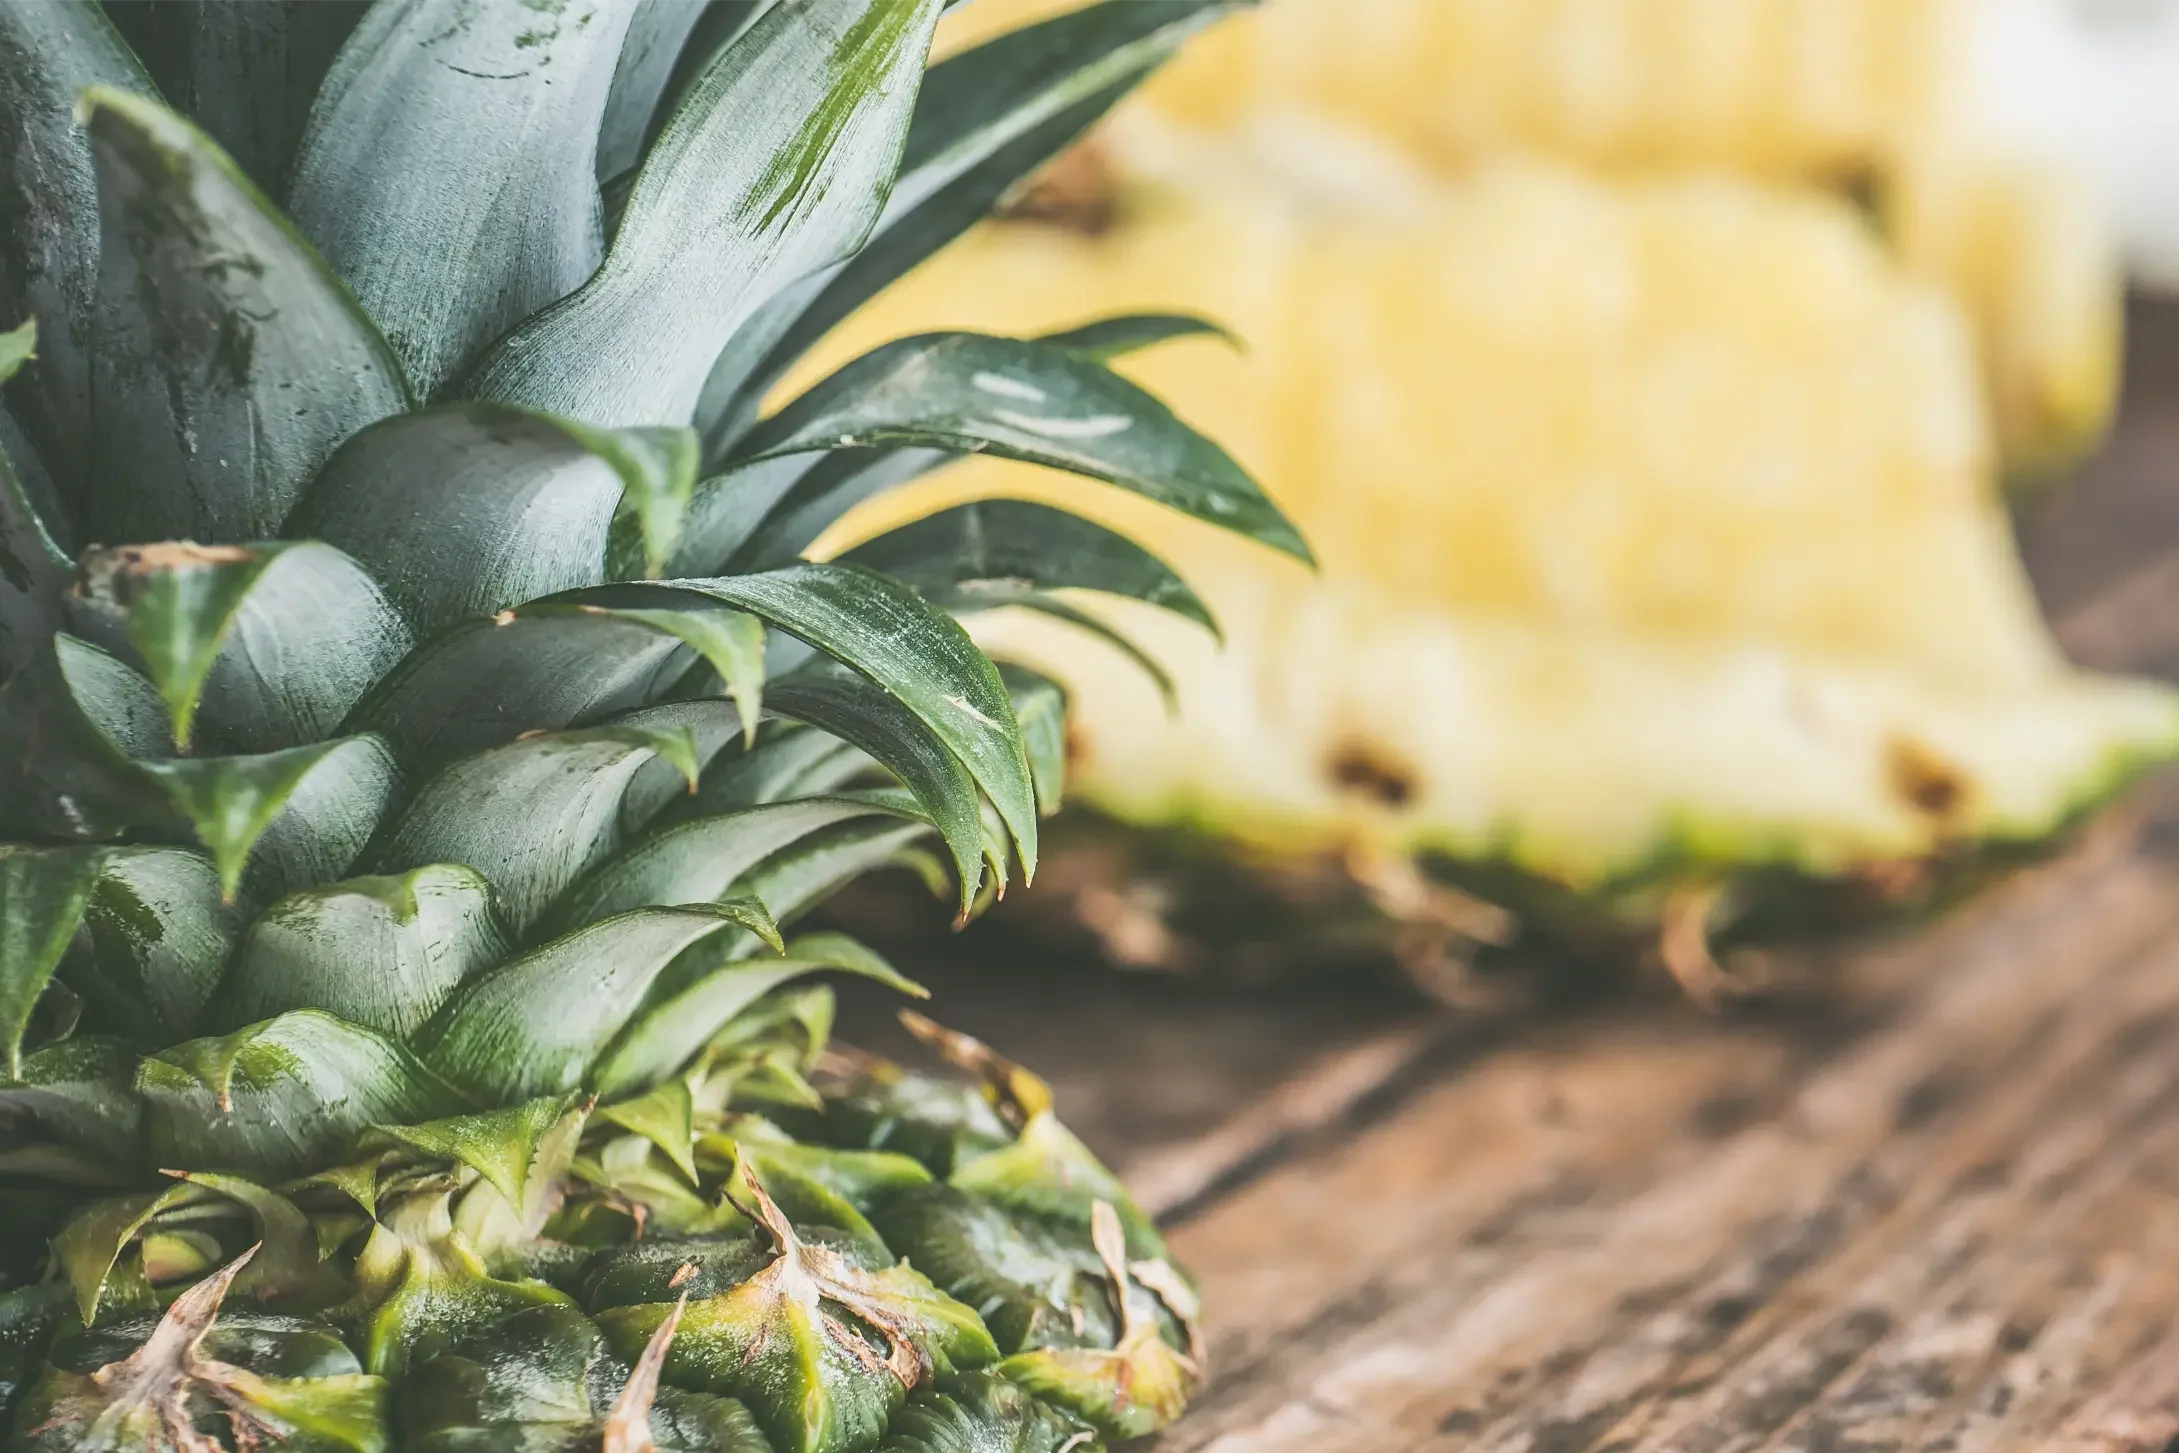 An image of pineapples.